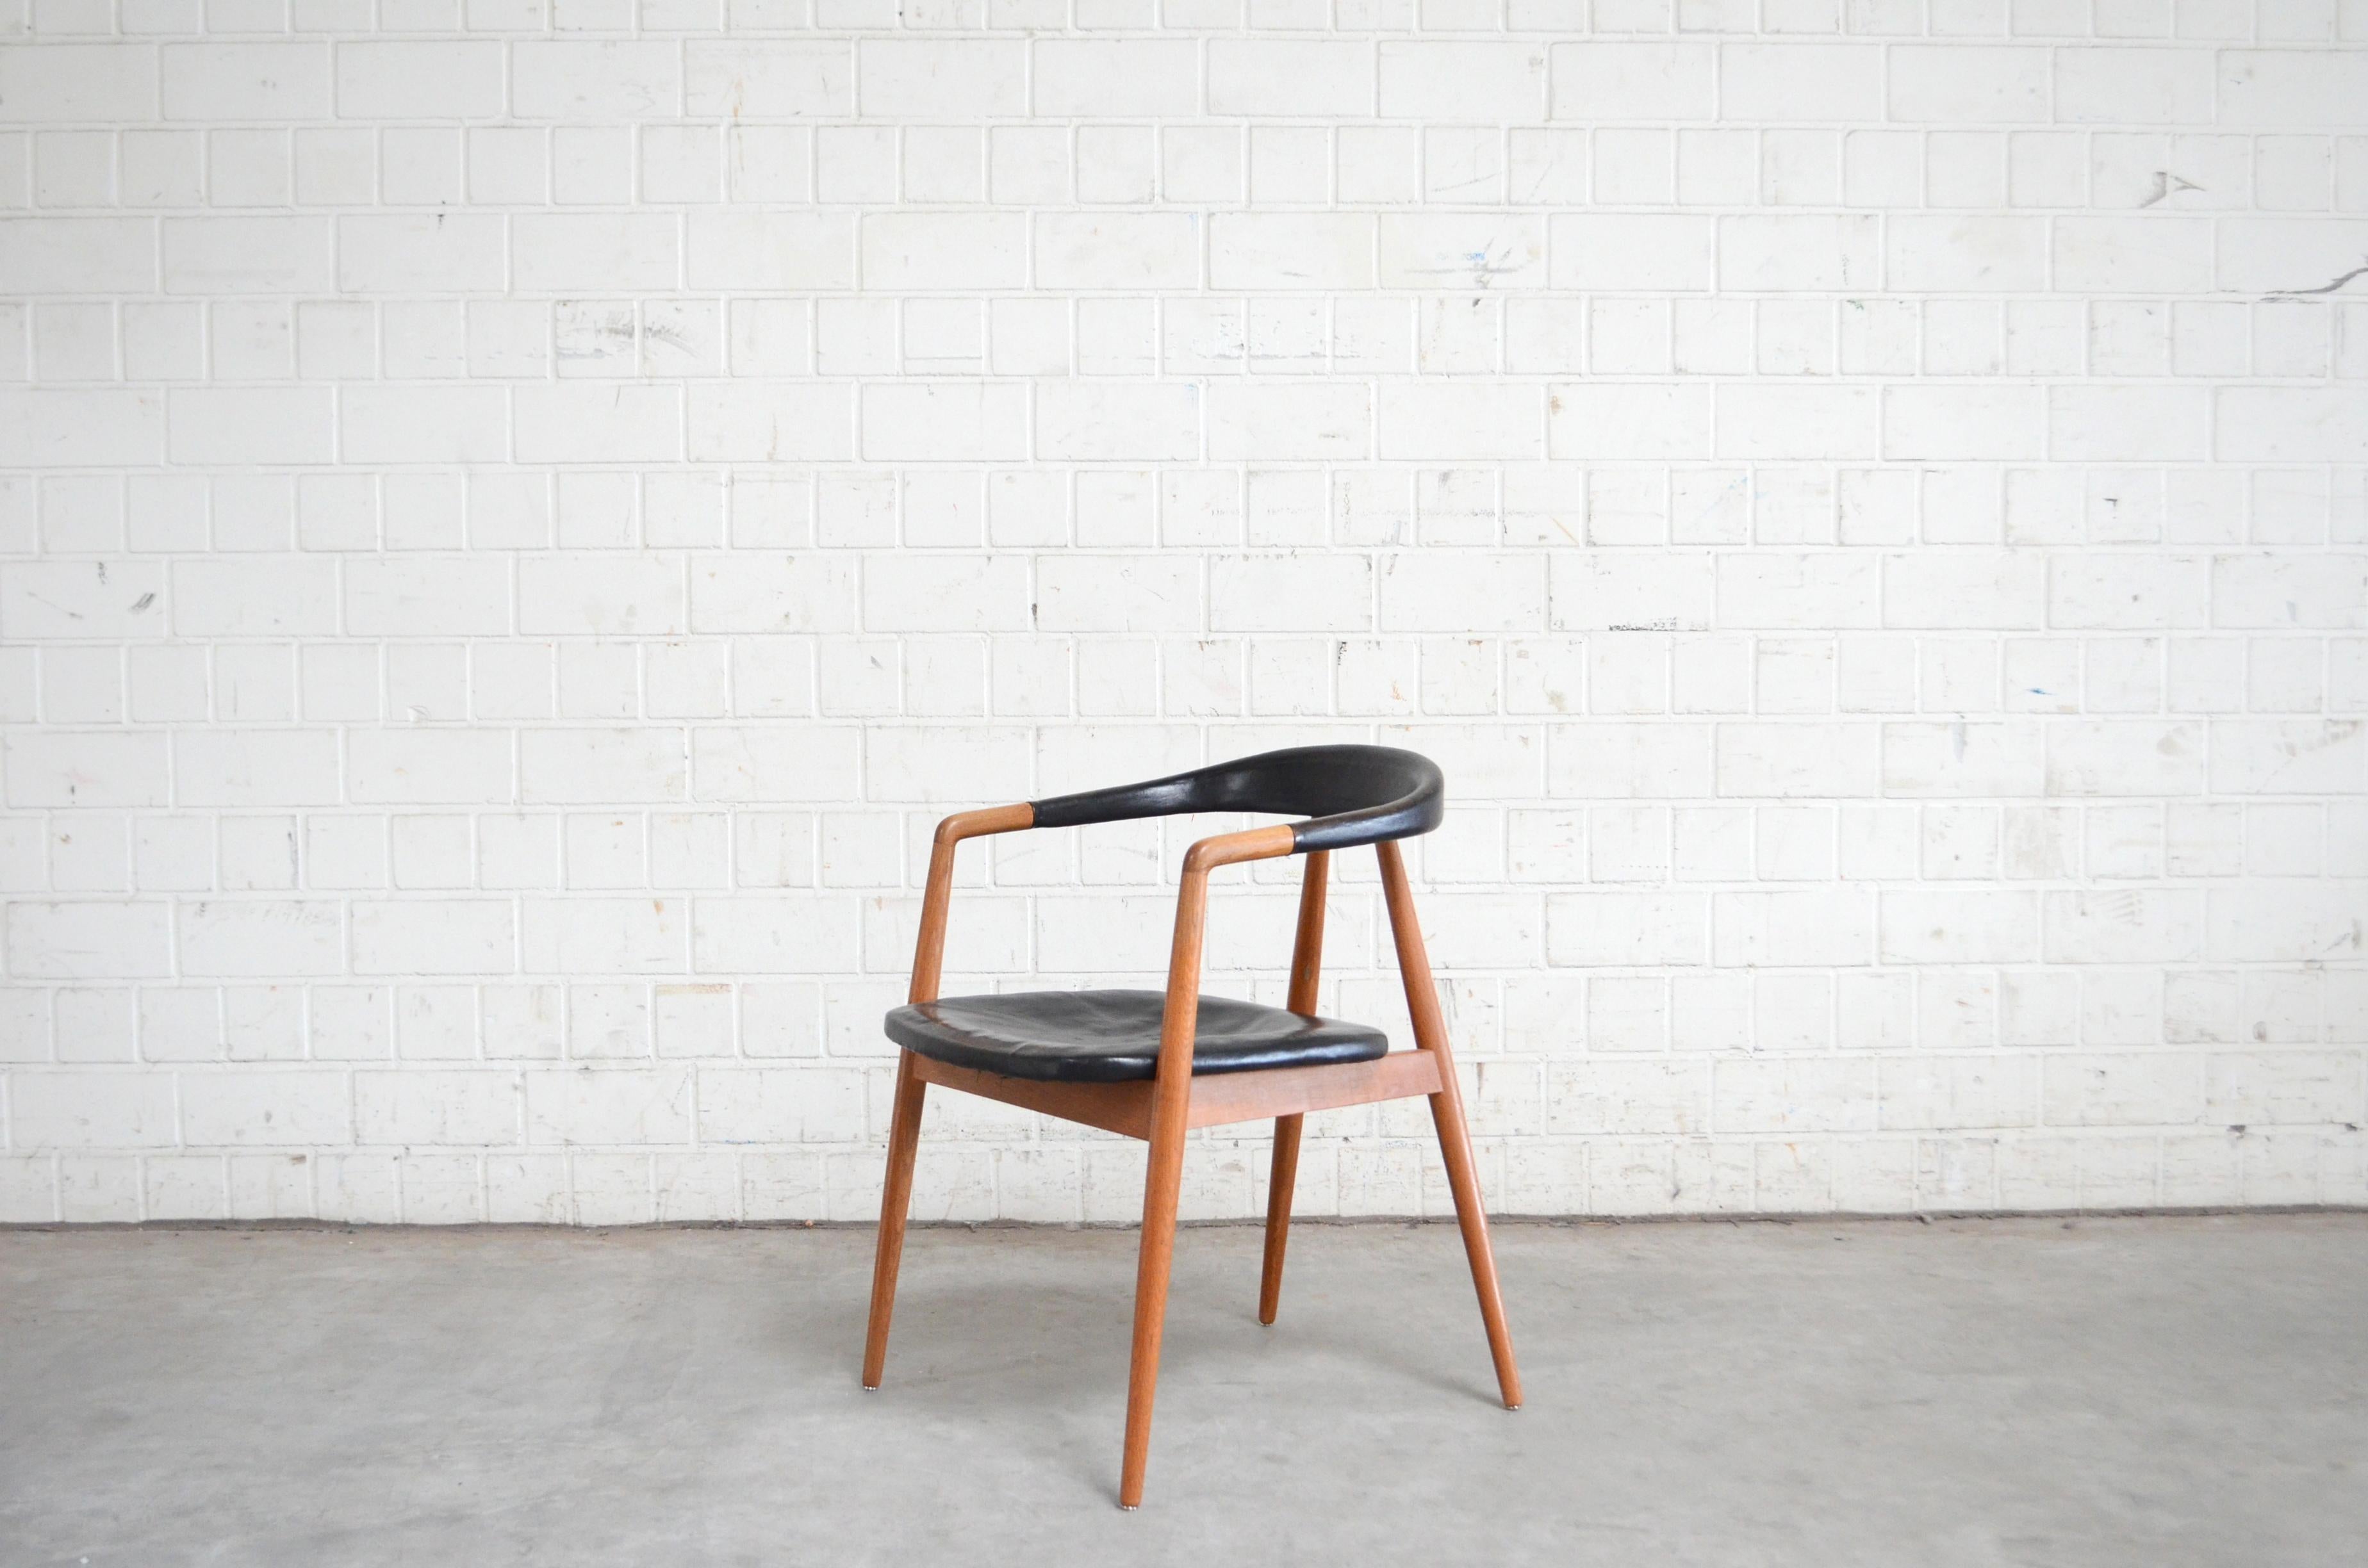 This sculptural armchair is designed 1958 by Helmut Magg for German manufacture Deutsche Werkstätten.
The frame is made of oak, the seat and armrest in black leather.
The model is DeWe 1172 A.
This Magg Chair is very rare and hard to find  in this